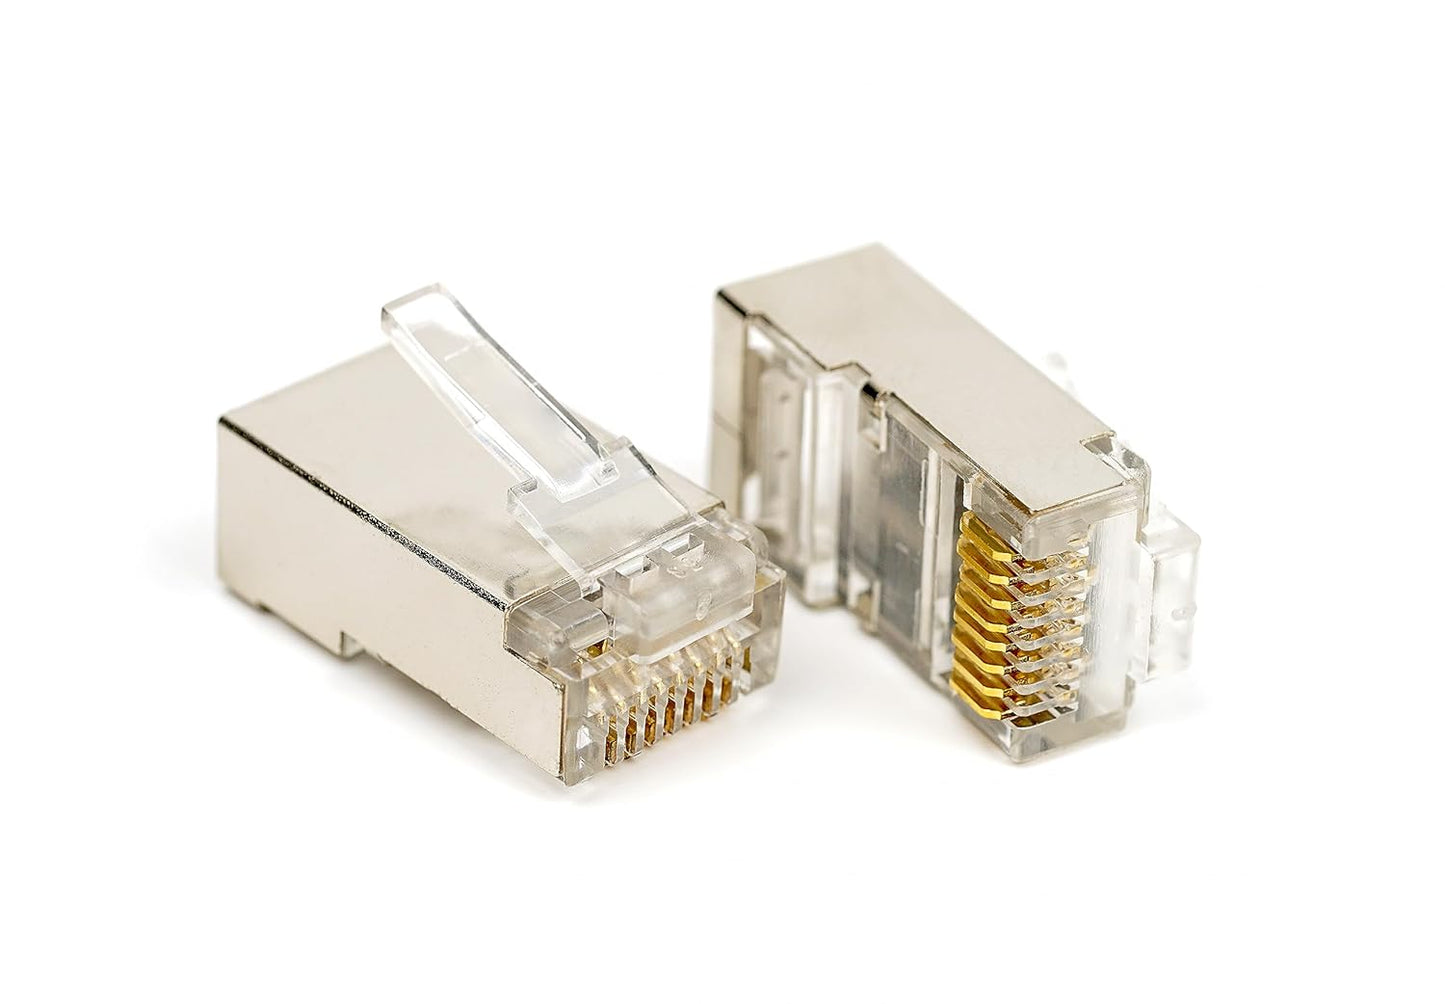 iVoltaa STP Cat6 RJ45 Plugs - Metal Shielded Ethernet Connectors for Cat6/Cat6a/Cat5e Cables - Ideal for Solid Wire and Standard Cable Network Crimps